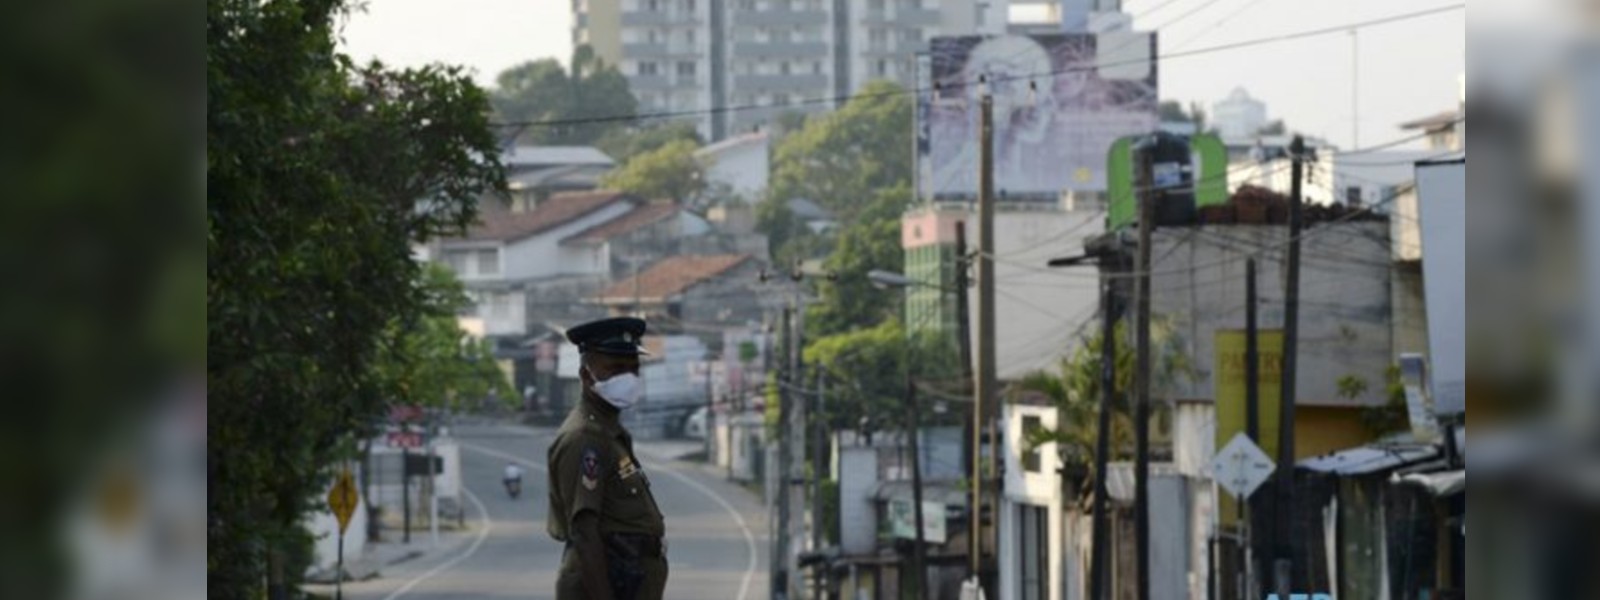 Curfew in the Districts of Colombo and Gampaha will continue until further notice